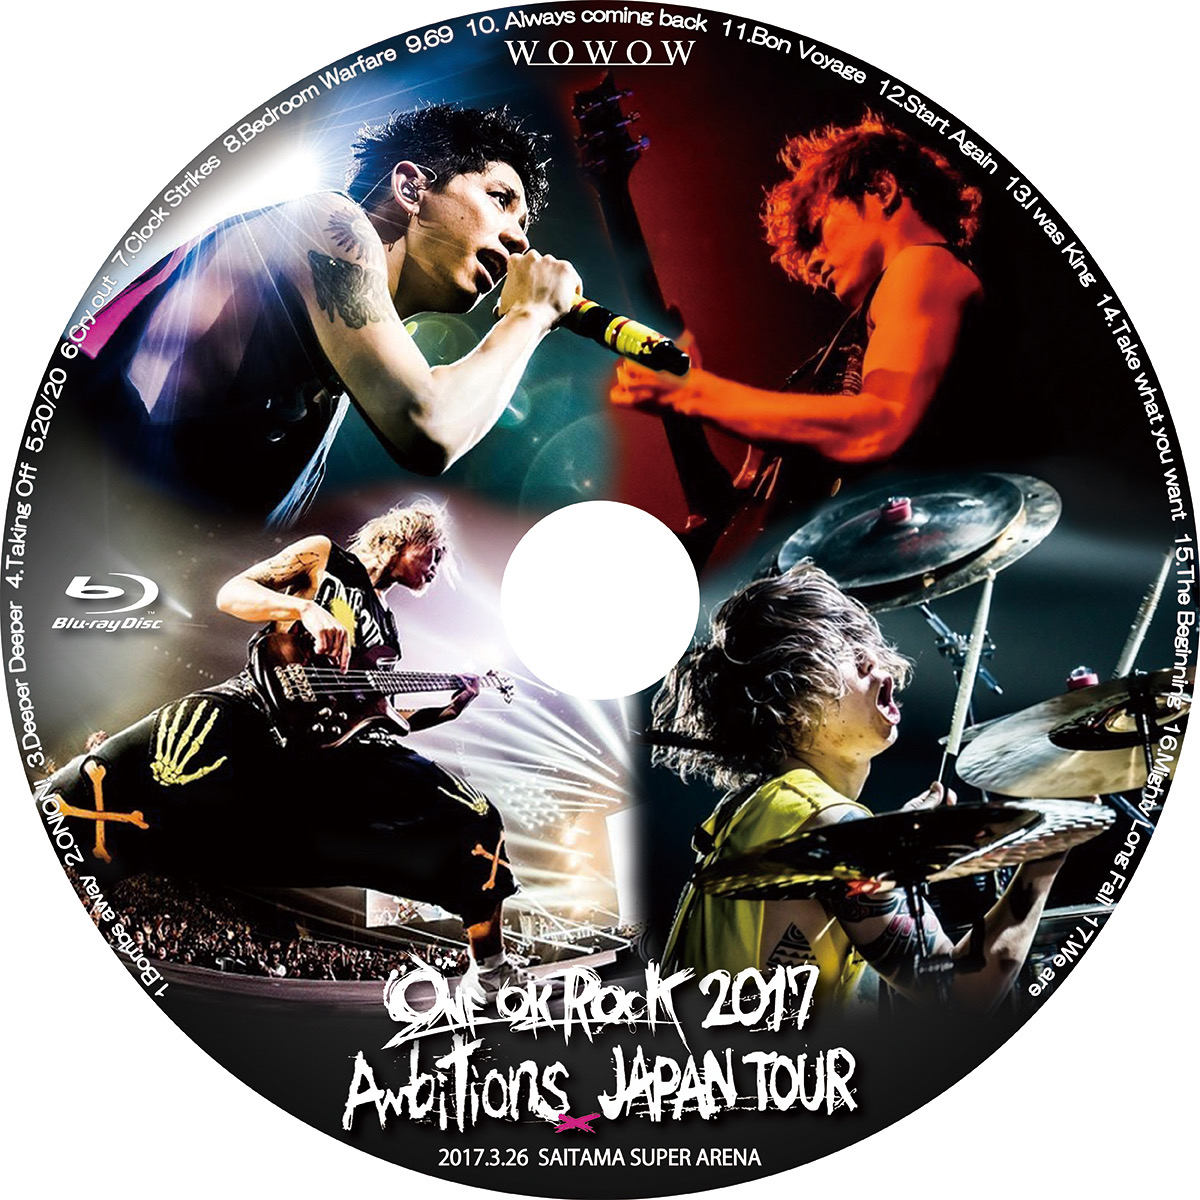 ONE OK ROCK 2017 “Ambitions"  DVD